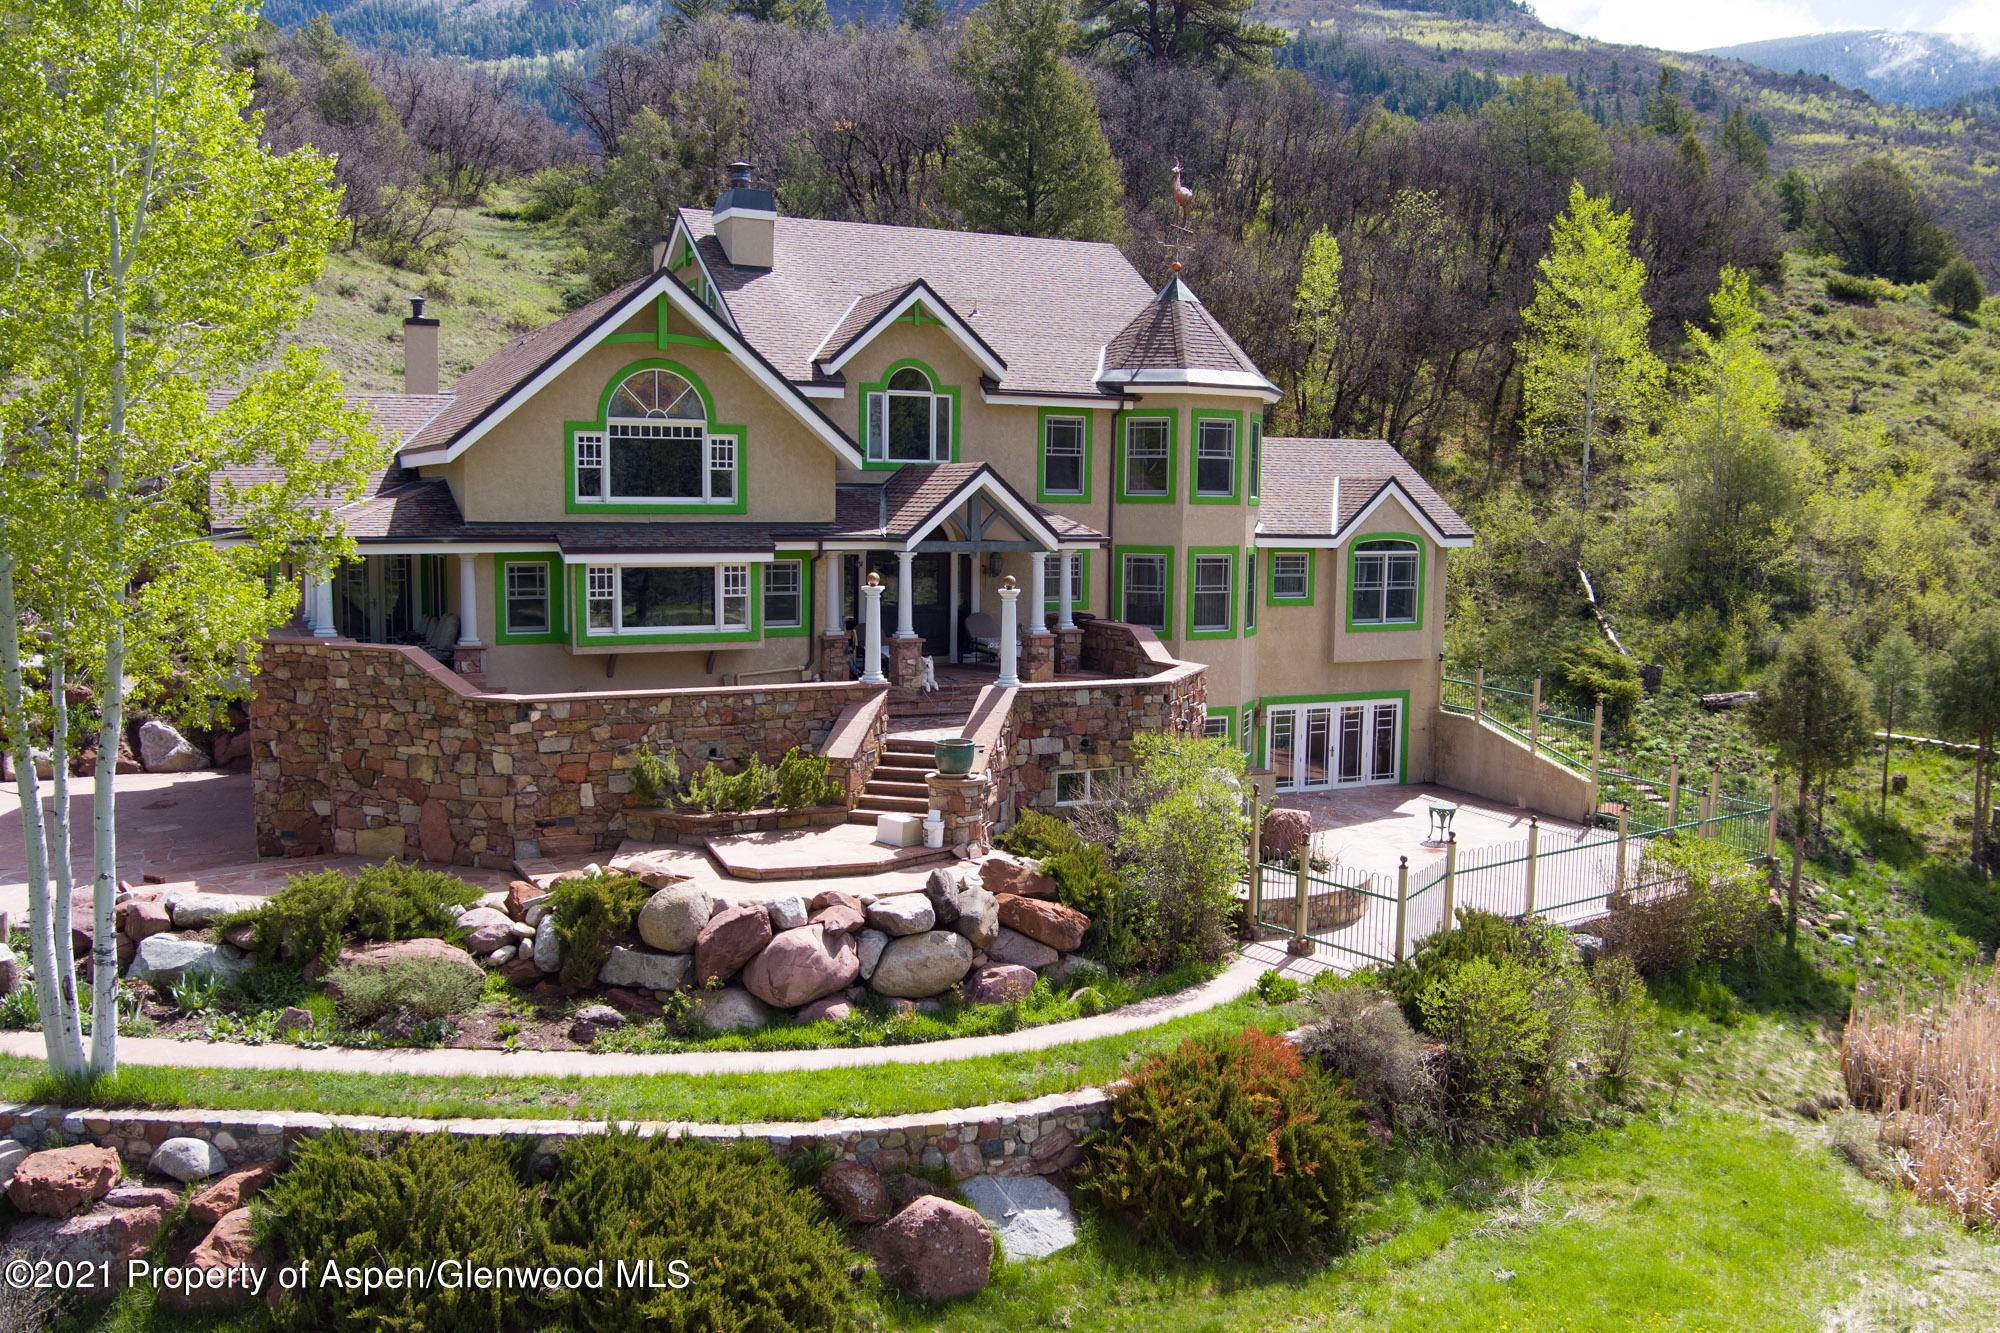 This stunning 160. 57 acre estate is situated in the beautiful Crystal River Valley, with unobstructedviews of Chair Mountain.